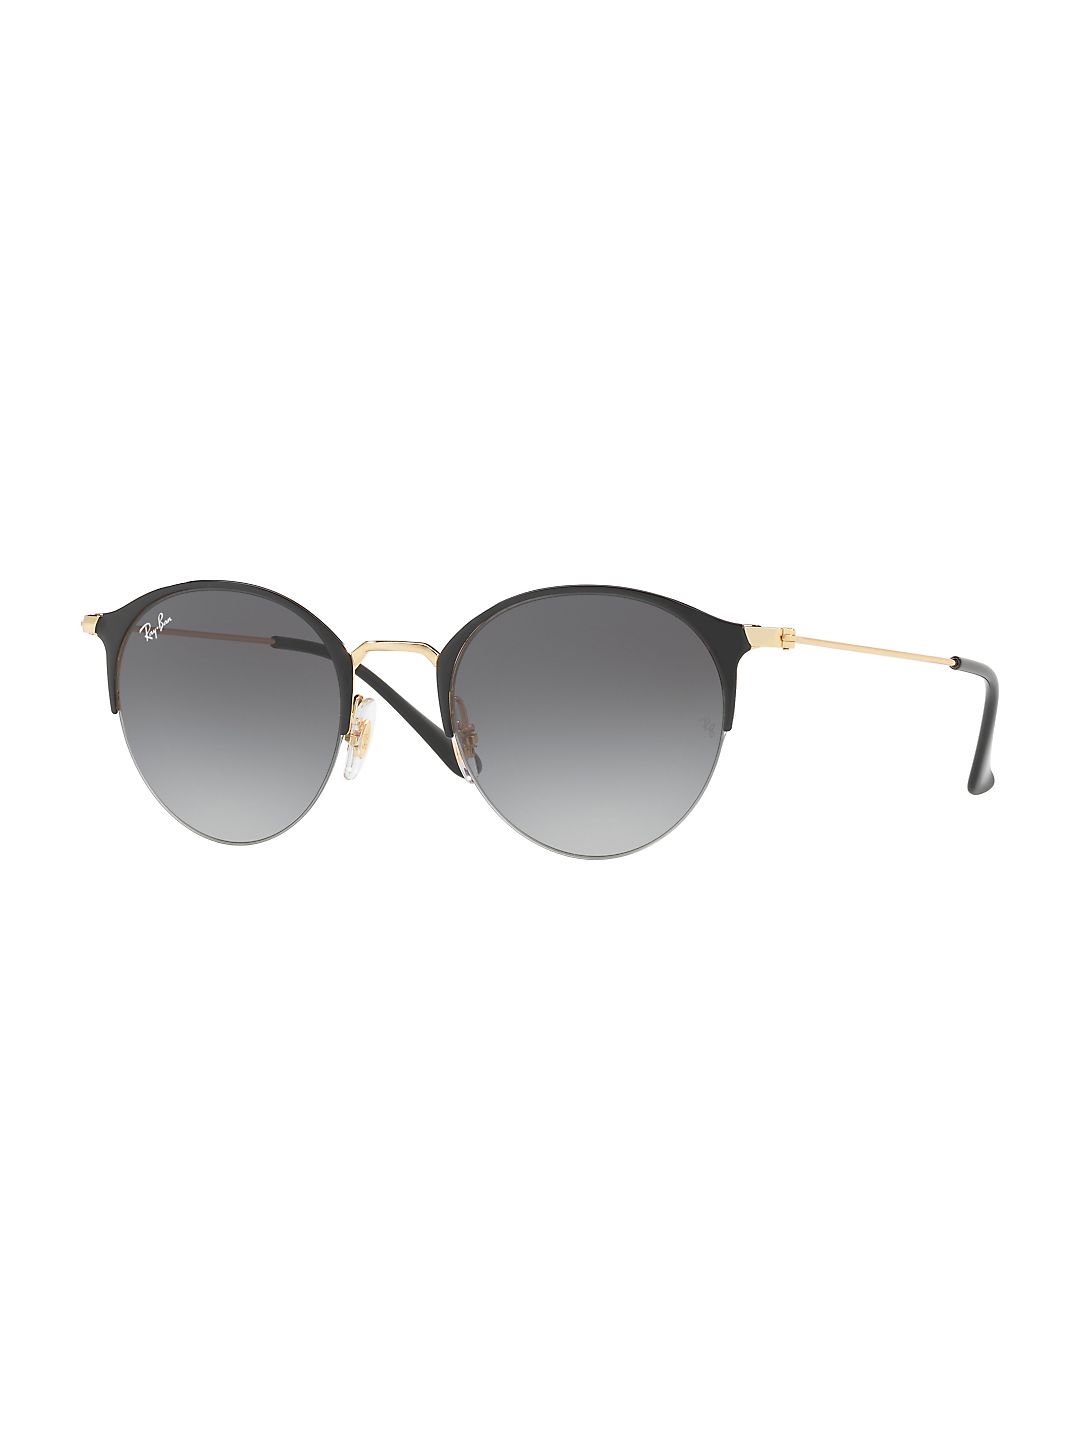 Ray-Ban Unisex RB3578 Round Metal Sunglasses, 50mm - image 2 of 2